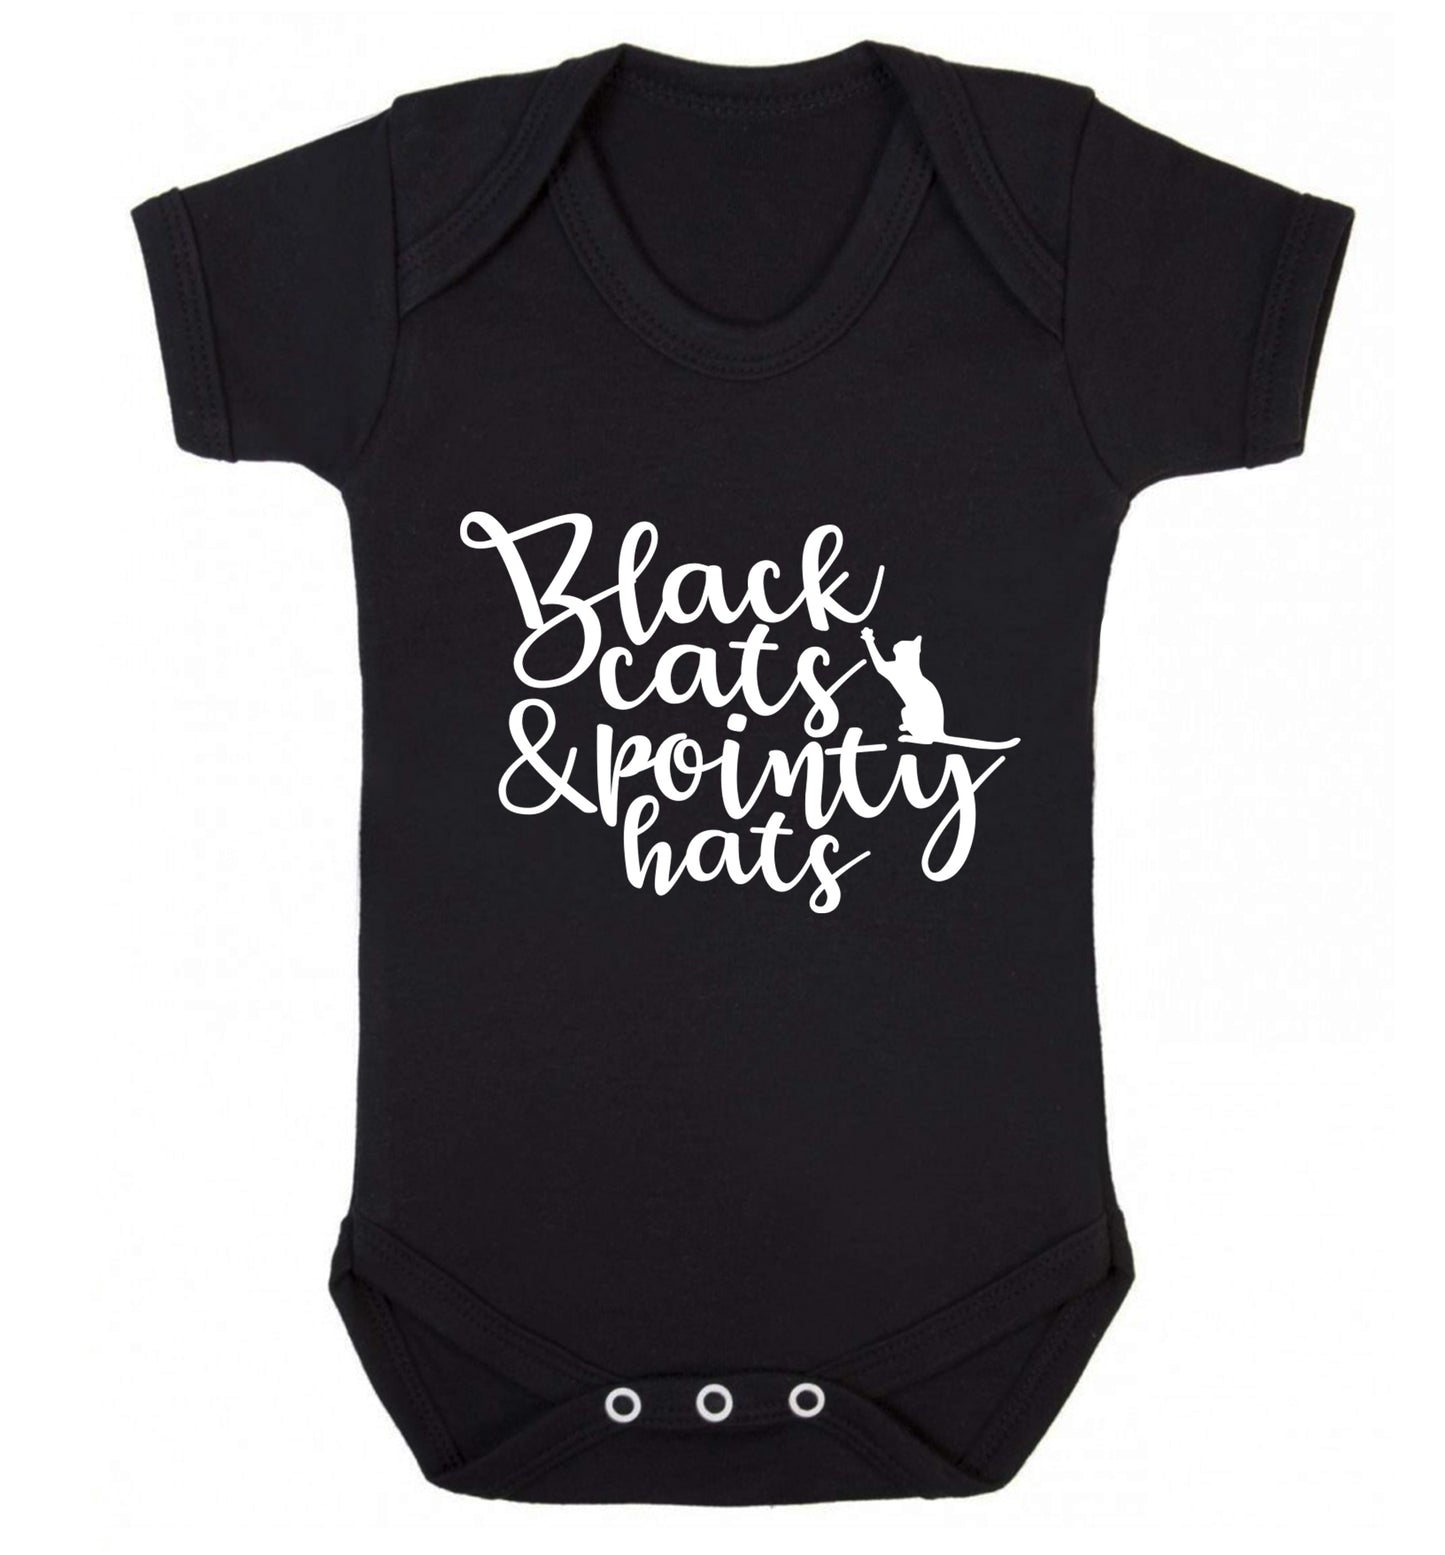 Black cats and pointy hats Baby Vest black 18-24 months